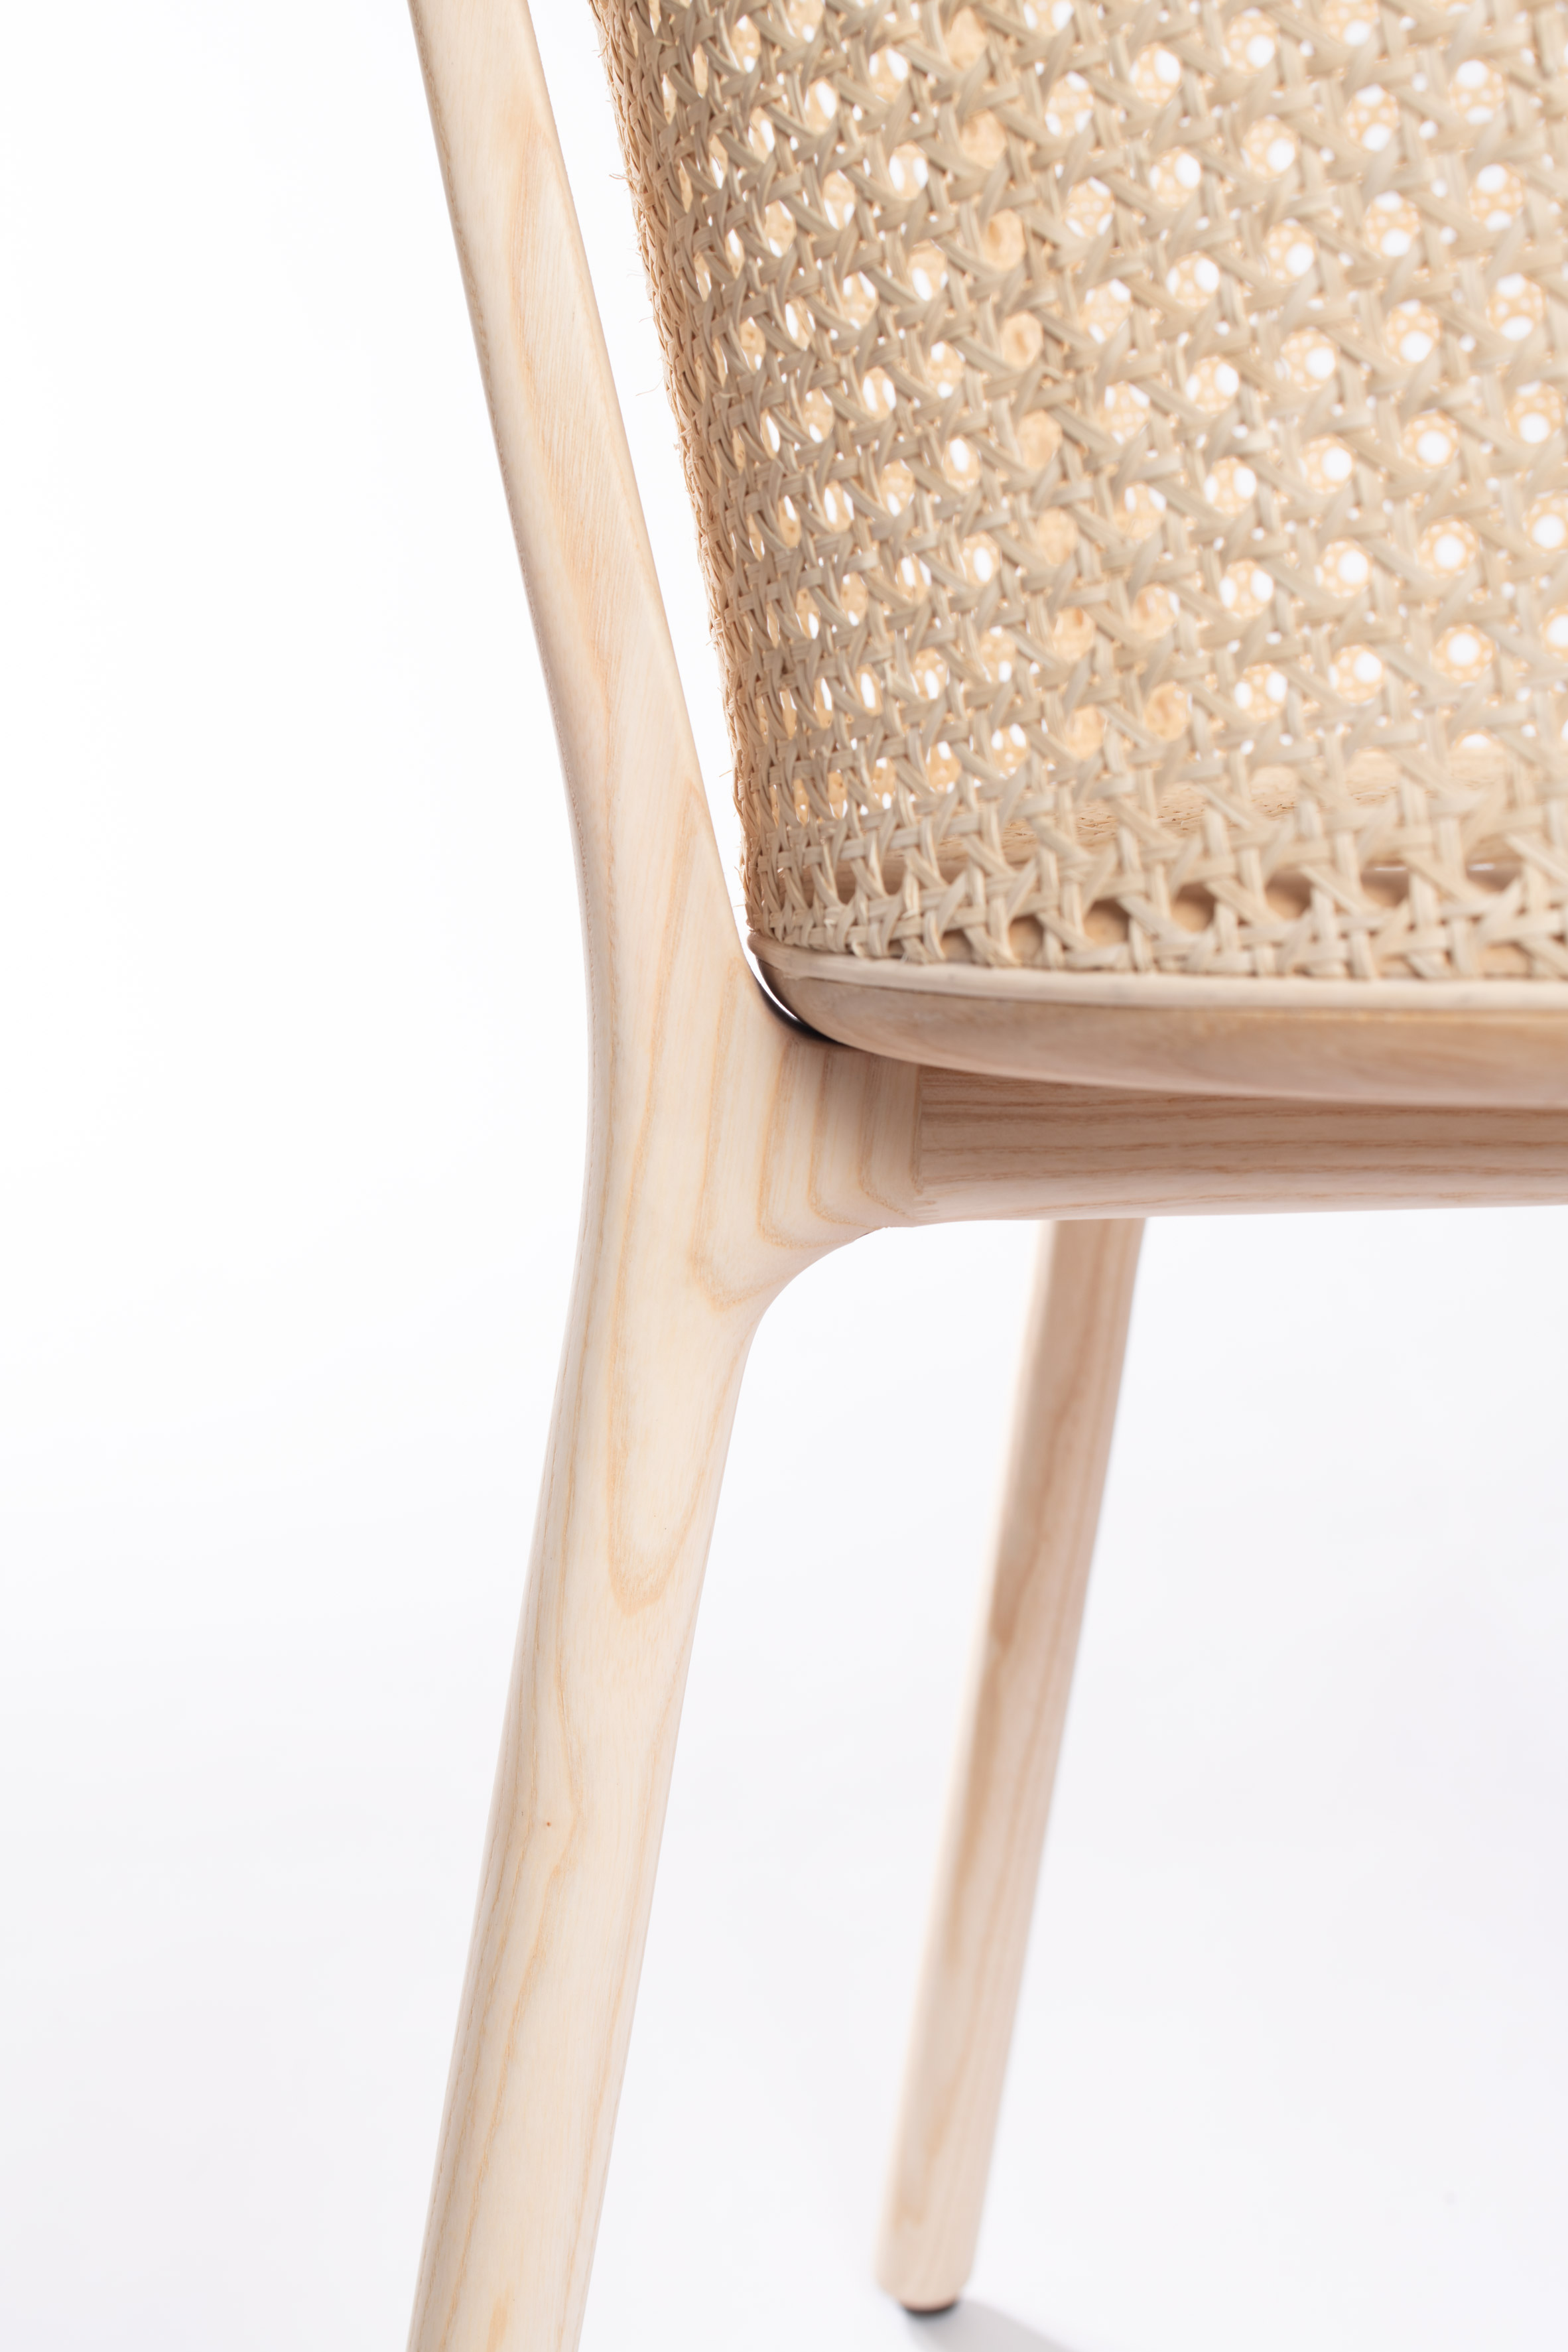 Latis chair by Samuel Wilkinson for The Conran Shop